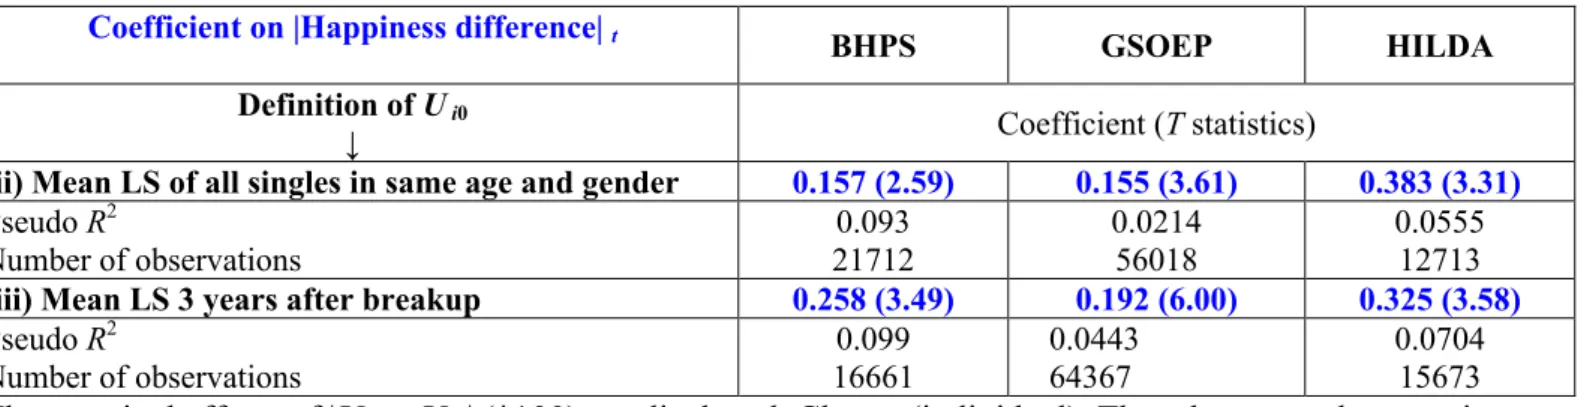 TABLE  4.  HAPPINESS  GAPS  INCREASE  THE  RISK  OF  DIVORCE  EVEN  WHEN  MARITAL  SURPLUS IS POSITIVE 